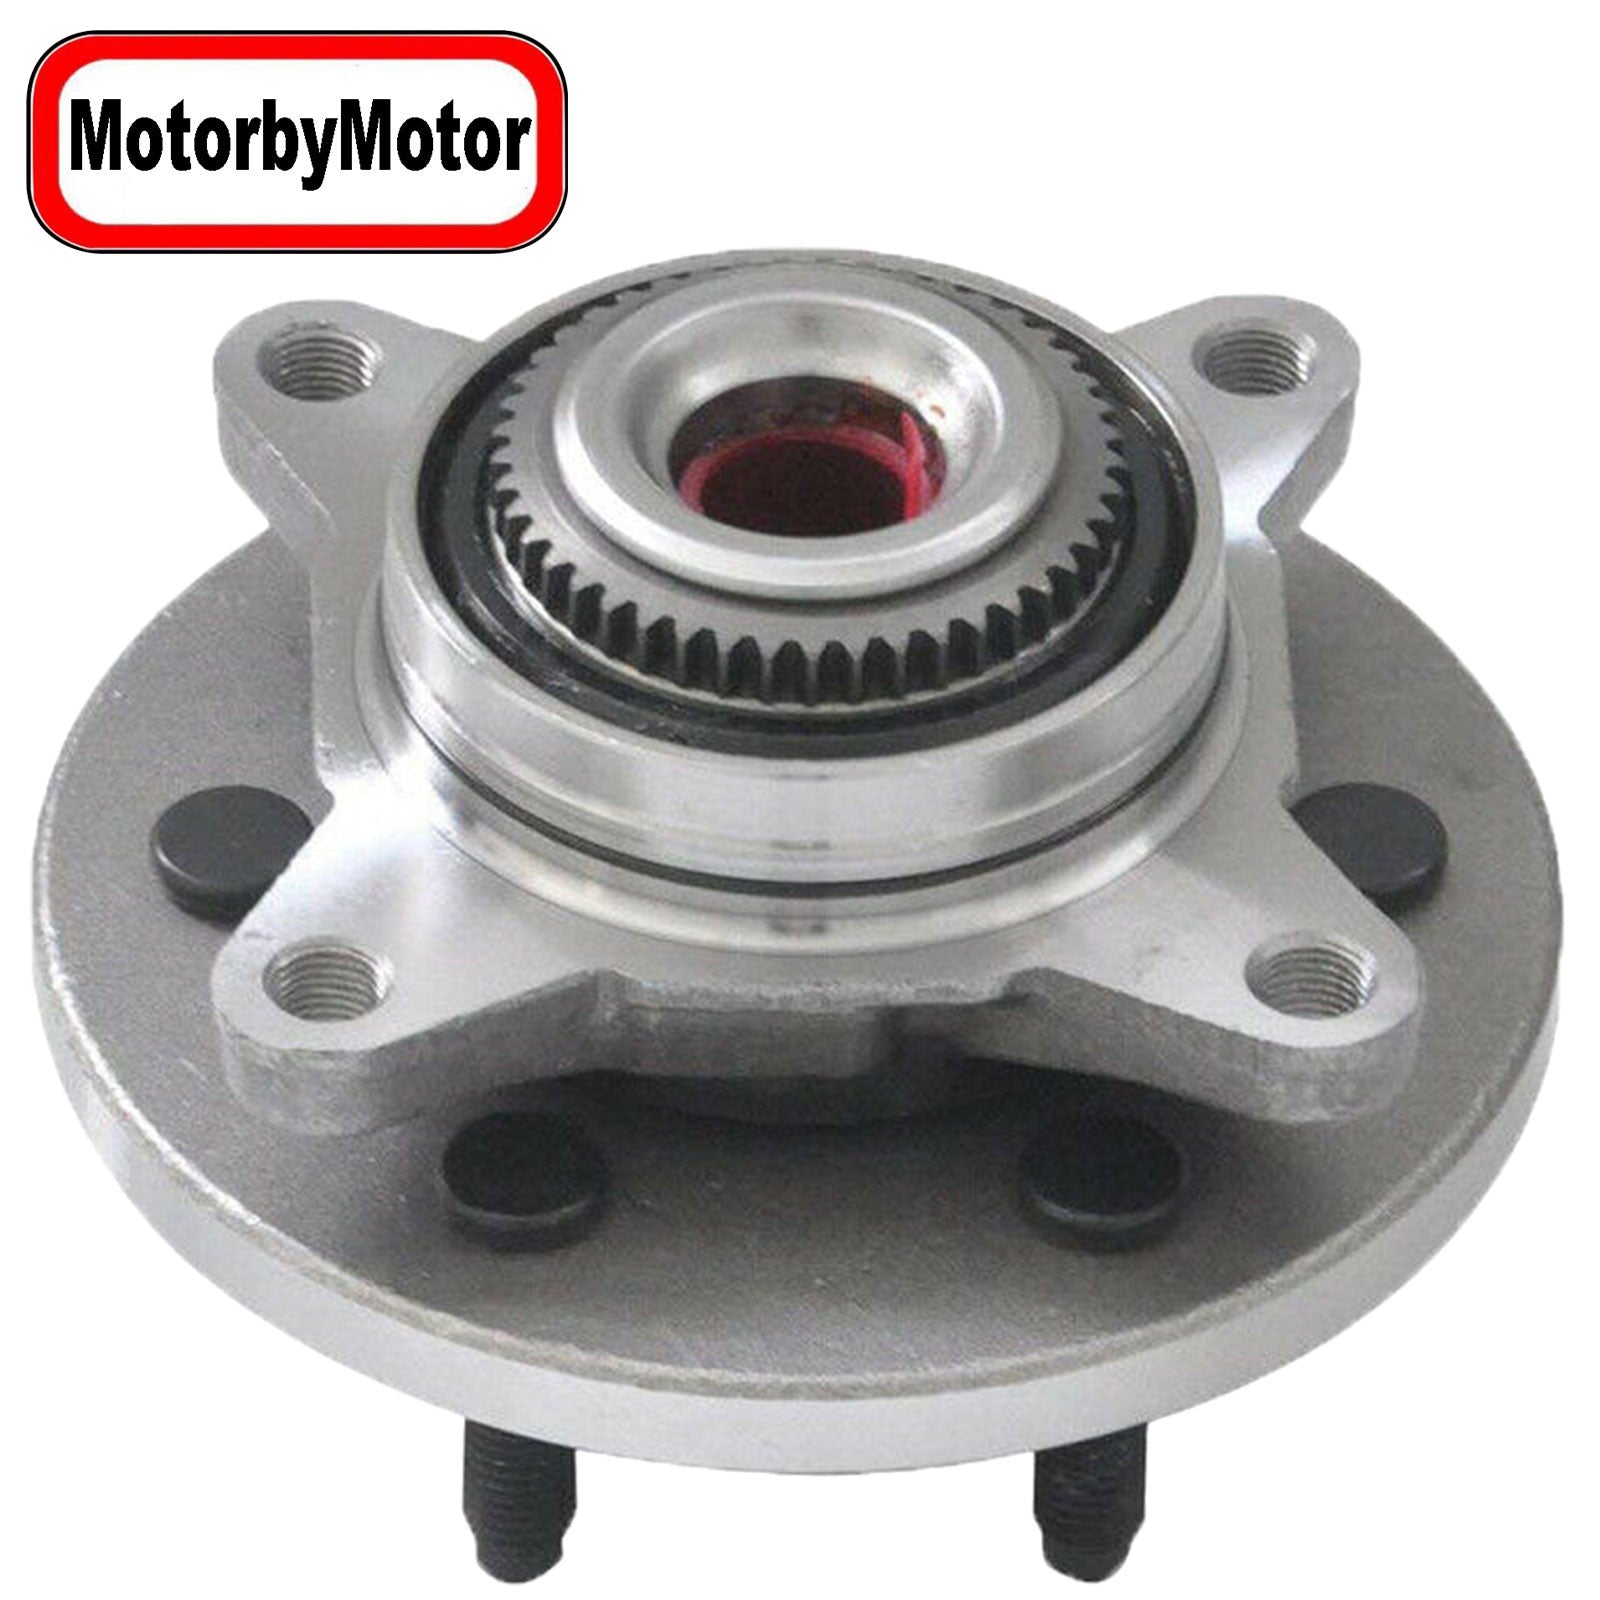 MotorbyMotor 515095 Front Wheel Bearing and Hub Assembly 4WD with 6 Lugs fits for Ford Expedition,Lincoln Navigator Low-Runout OE Directly Replacement Hub Bearing w/ABS MotorbyMotor